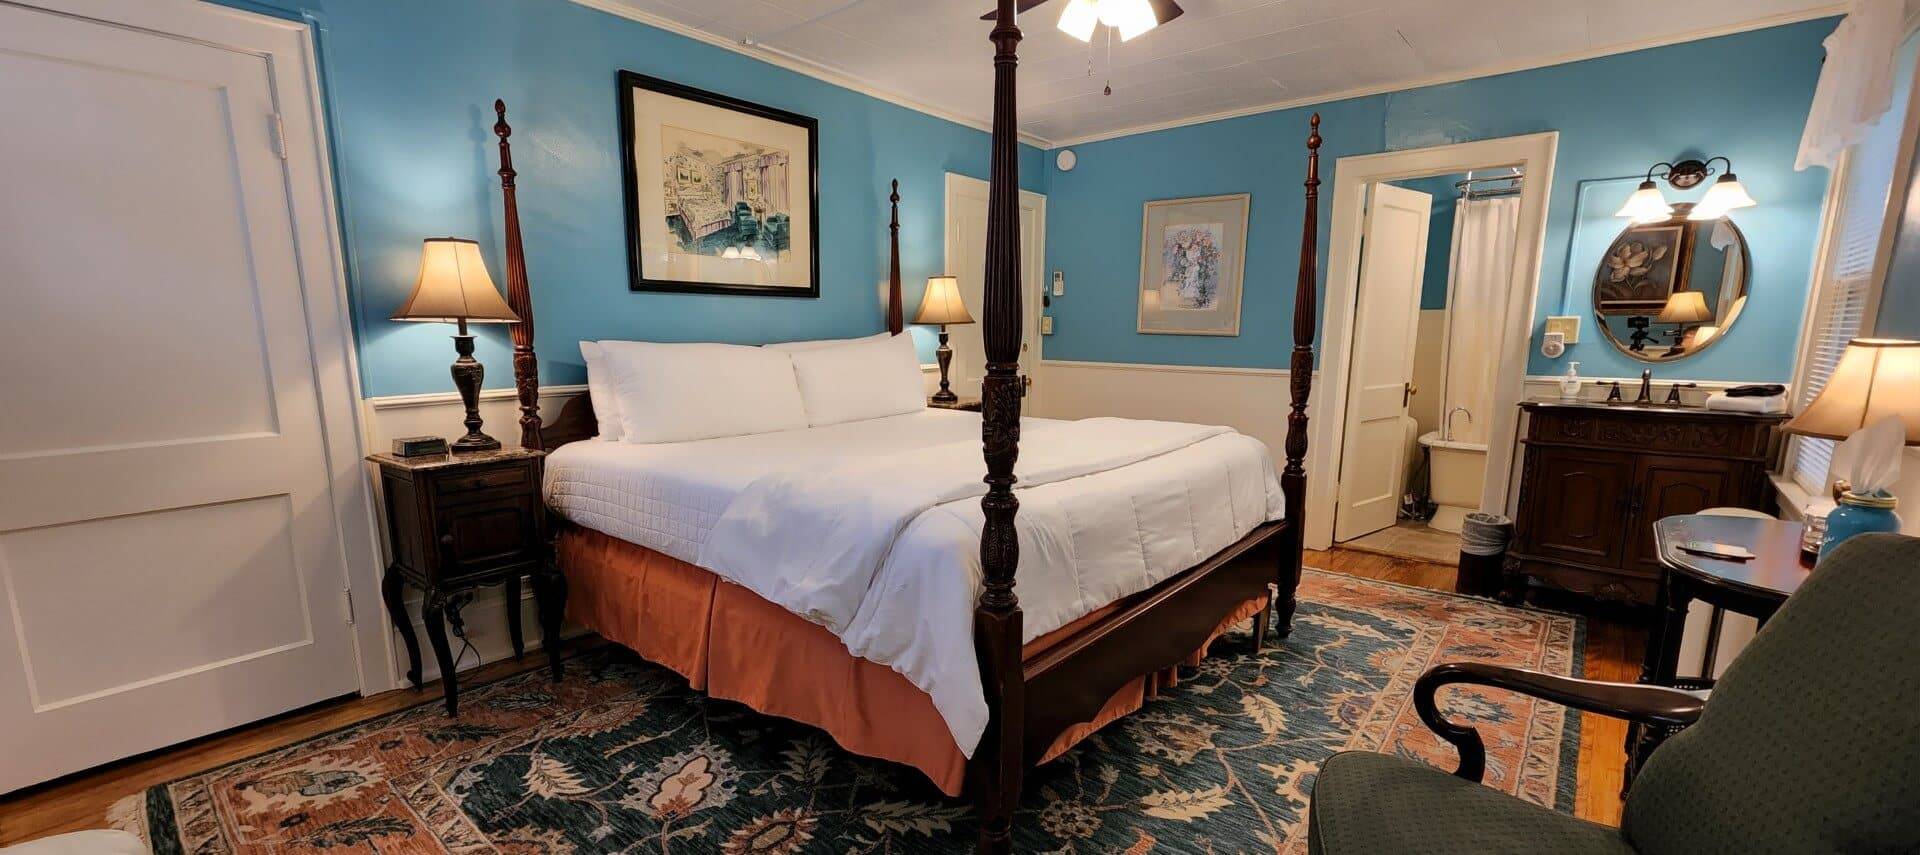 Bedroom with four poster bed, blue walls, antique furniture and doorway into a bathroom showing a clawfoot tub